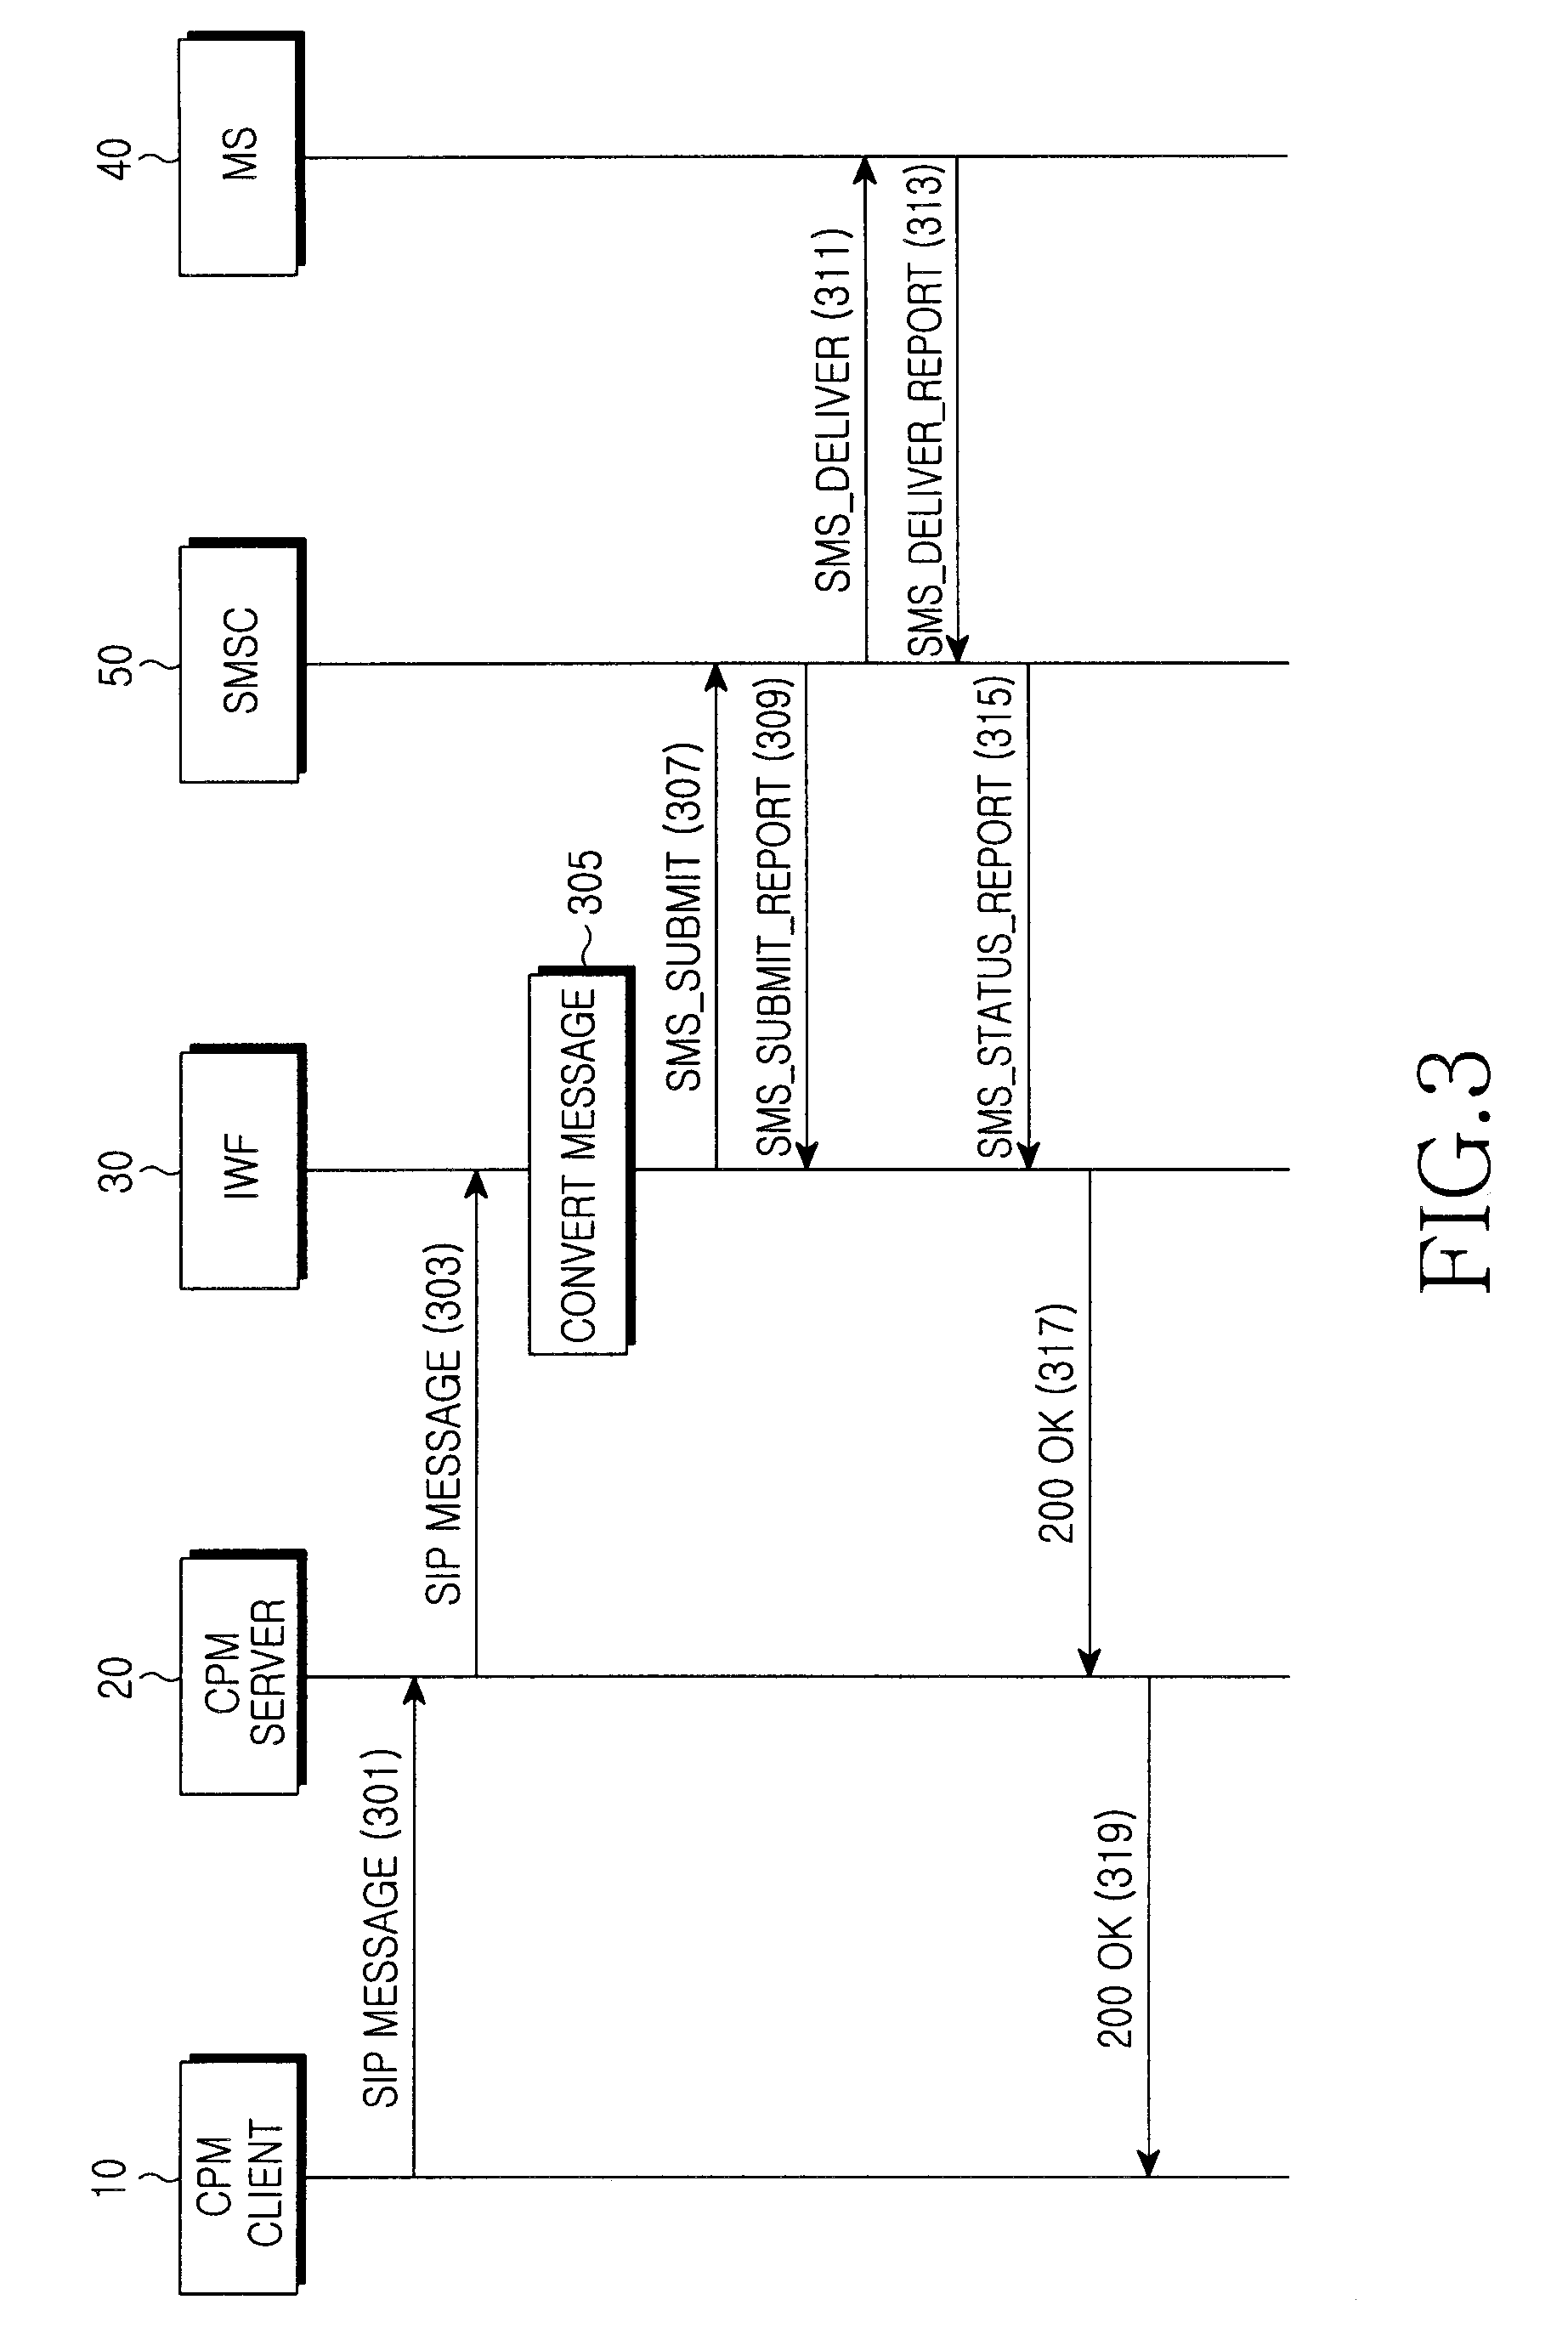 Method and system for managing message threads in converged IP messaging service